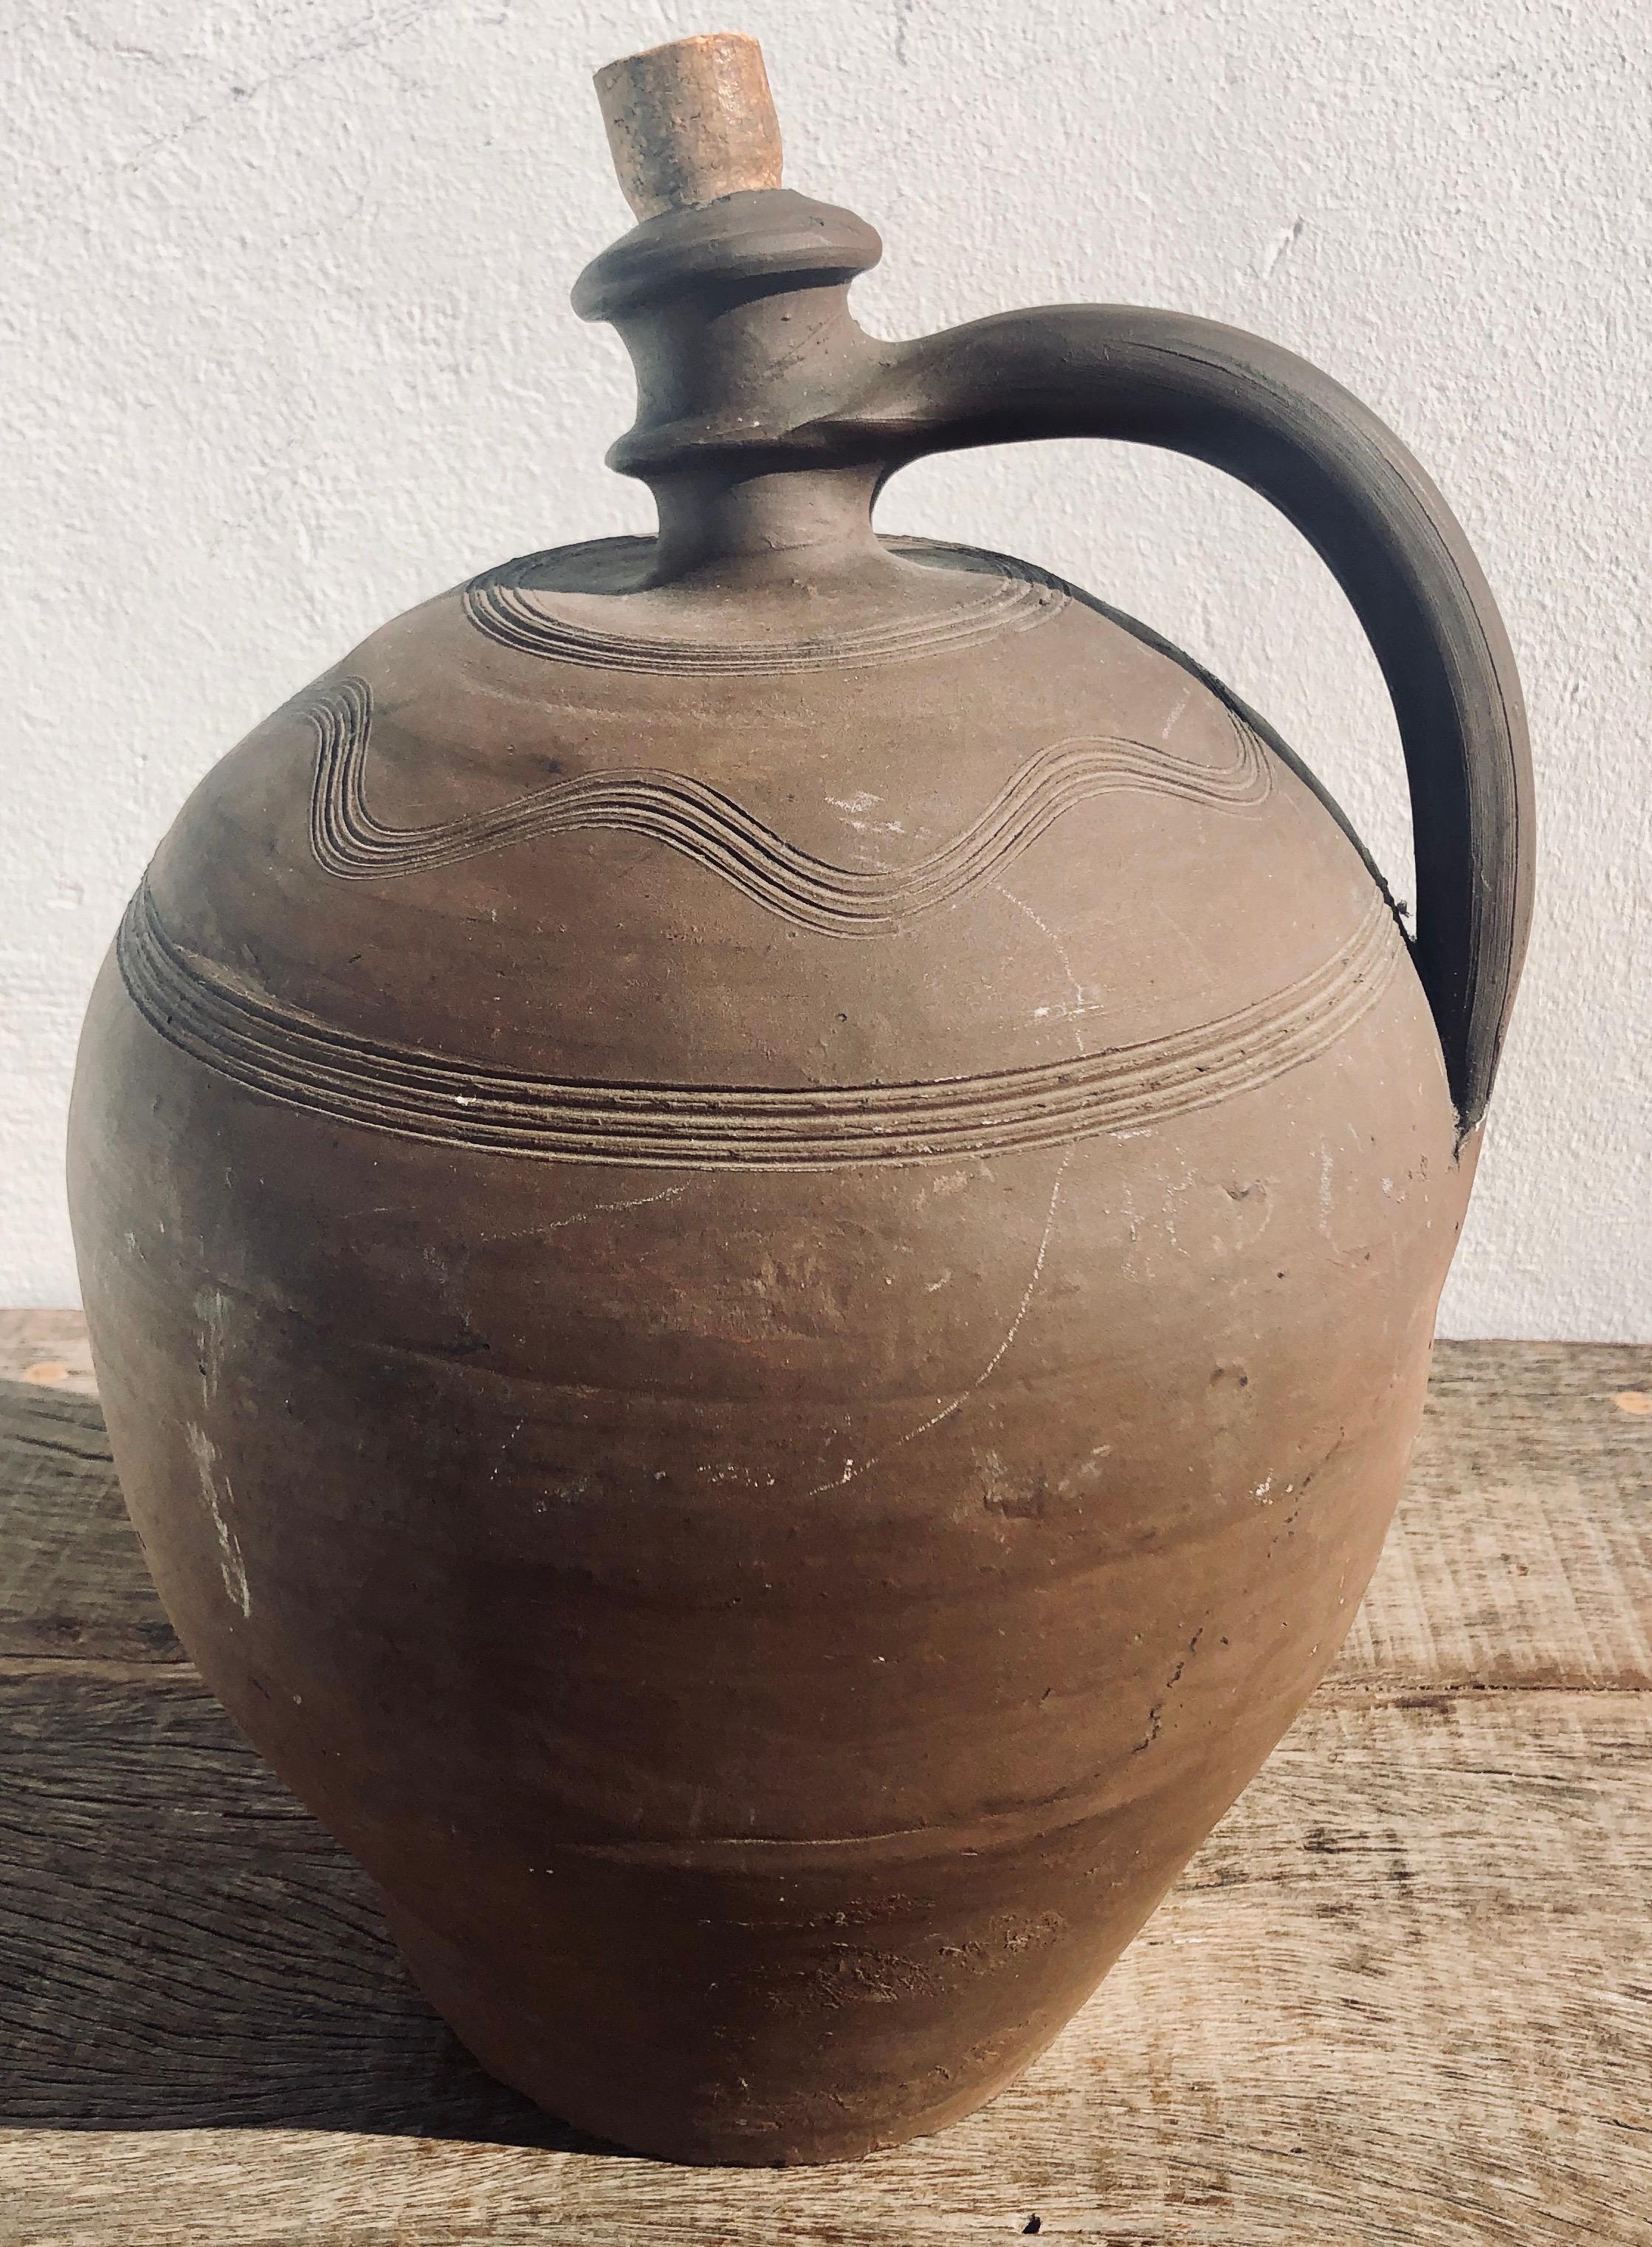 Unique French 19th ceramic decorative pottery with narrow corked neck, used to stored liquids as oil or wine. It is in great original condition, it is believed to be from the Mid-1800s, it shows signs of its age and use, it's got few chips and